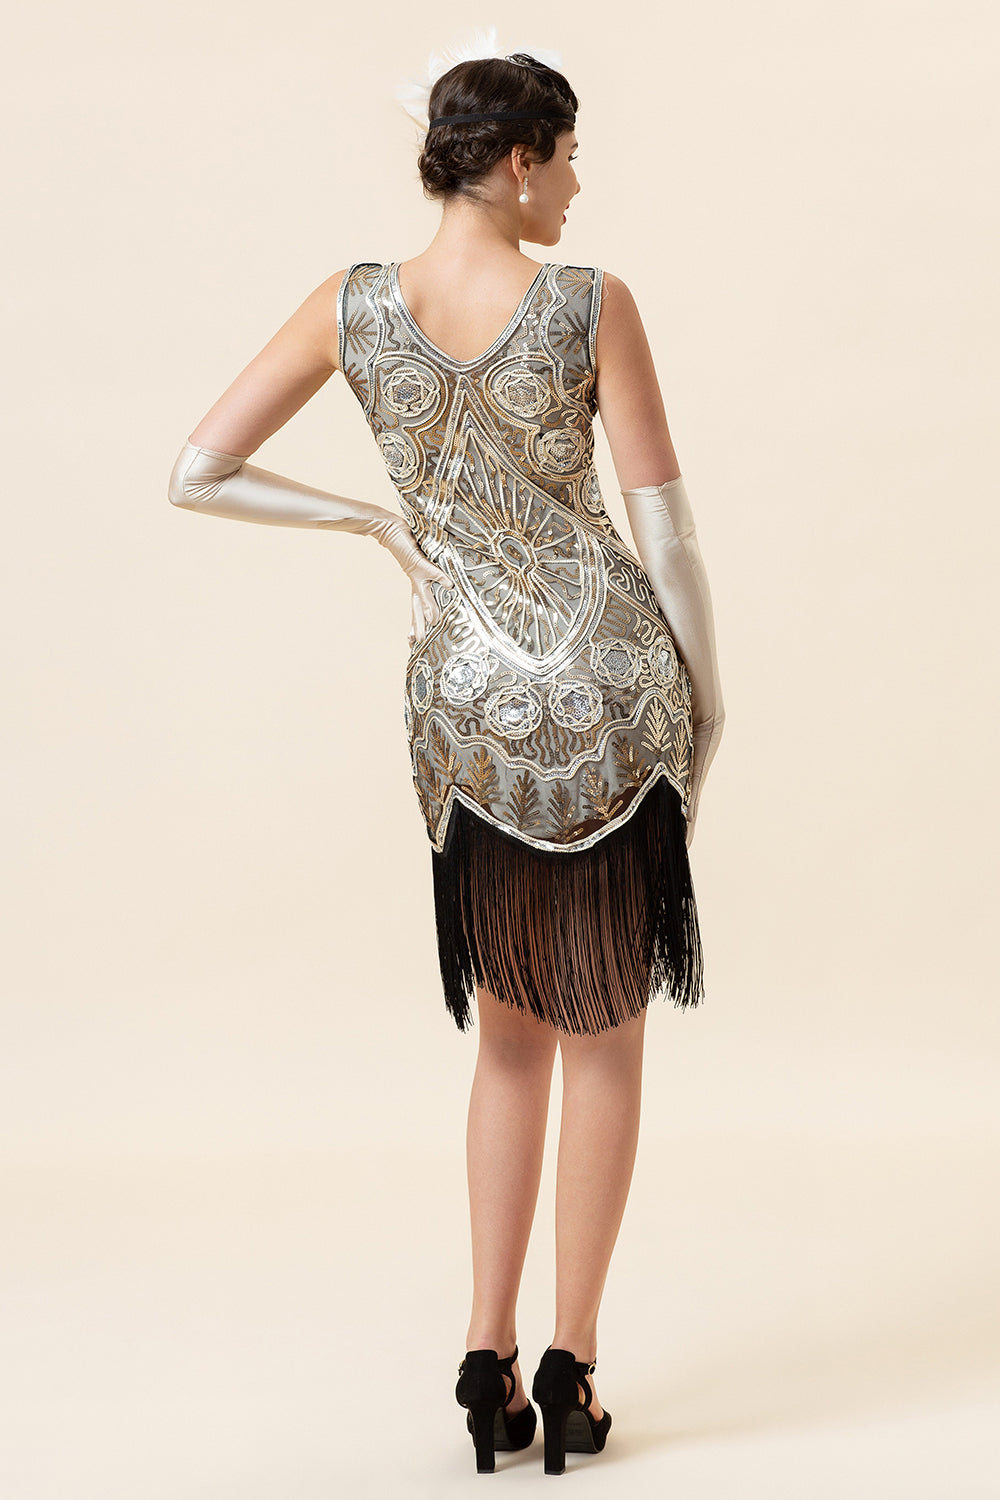 Silver Sequins Fringes 1920s Gatsby Dress with 20s Accessories Set